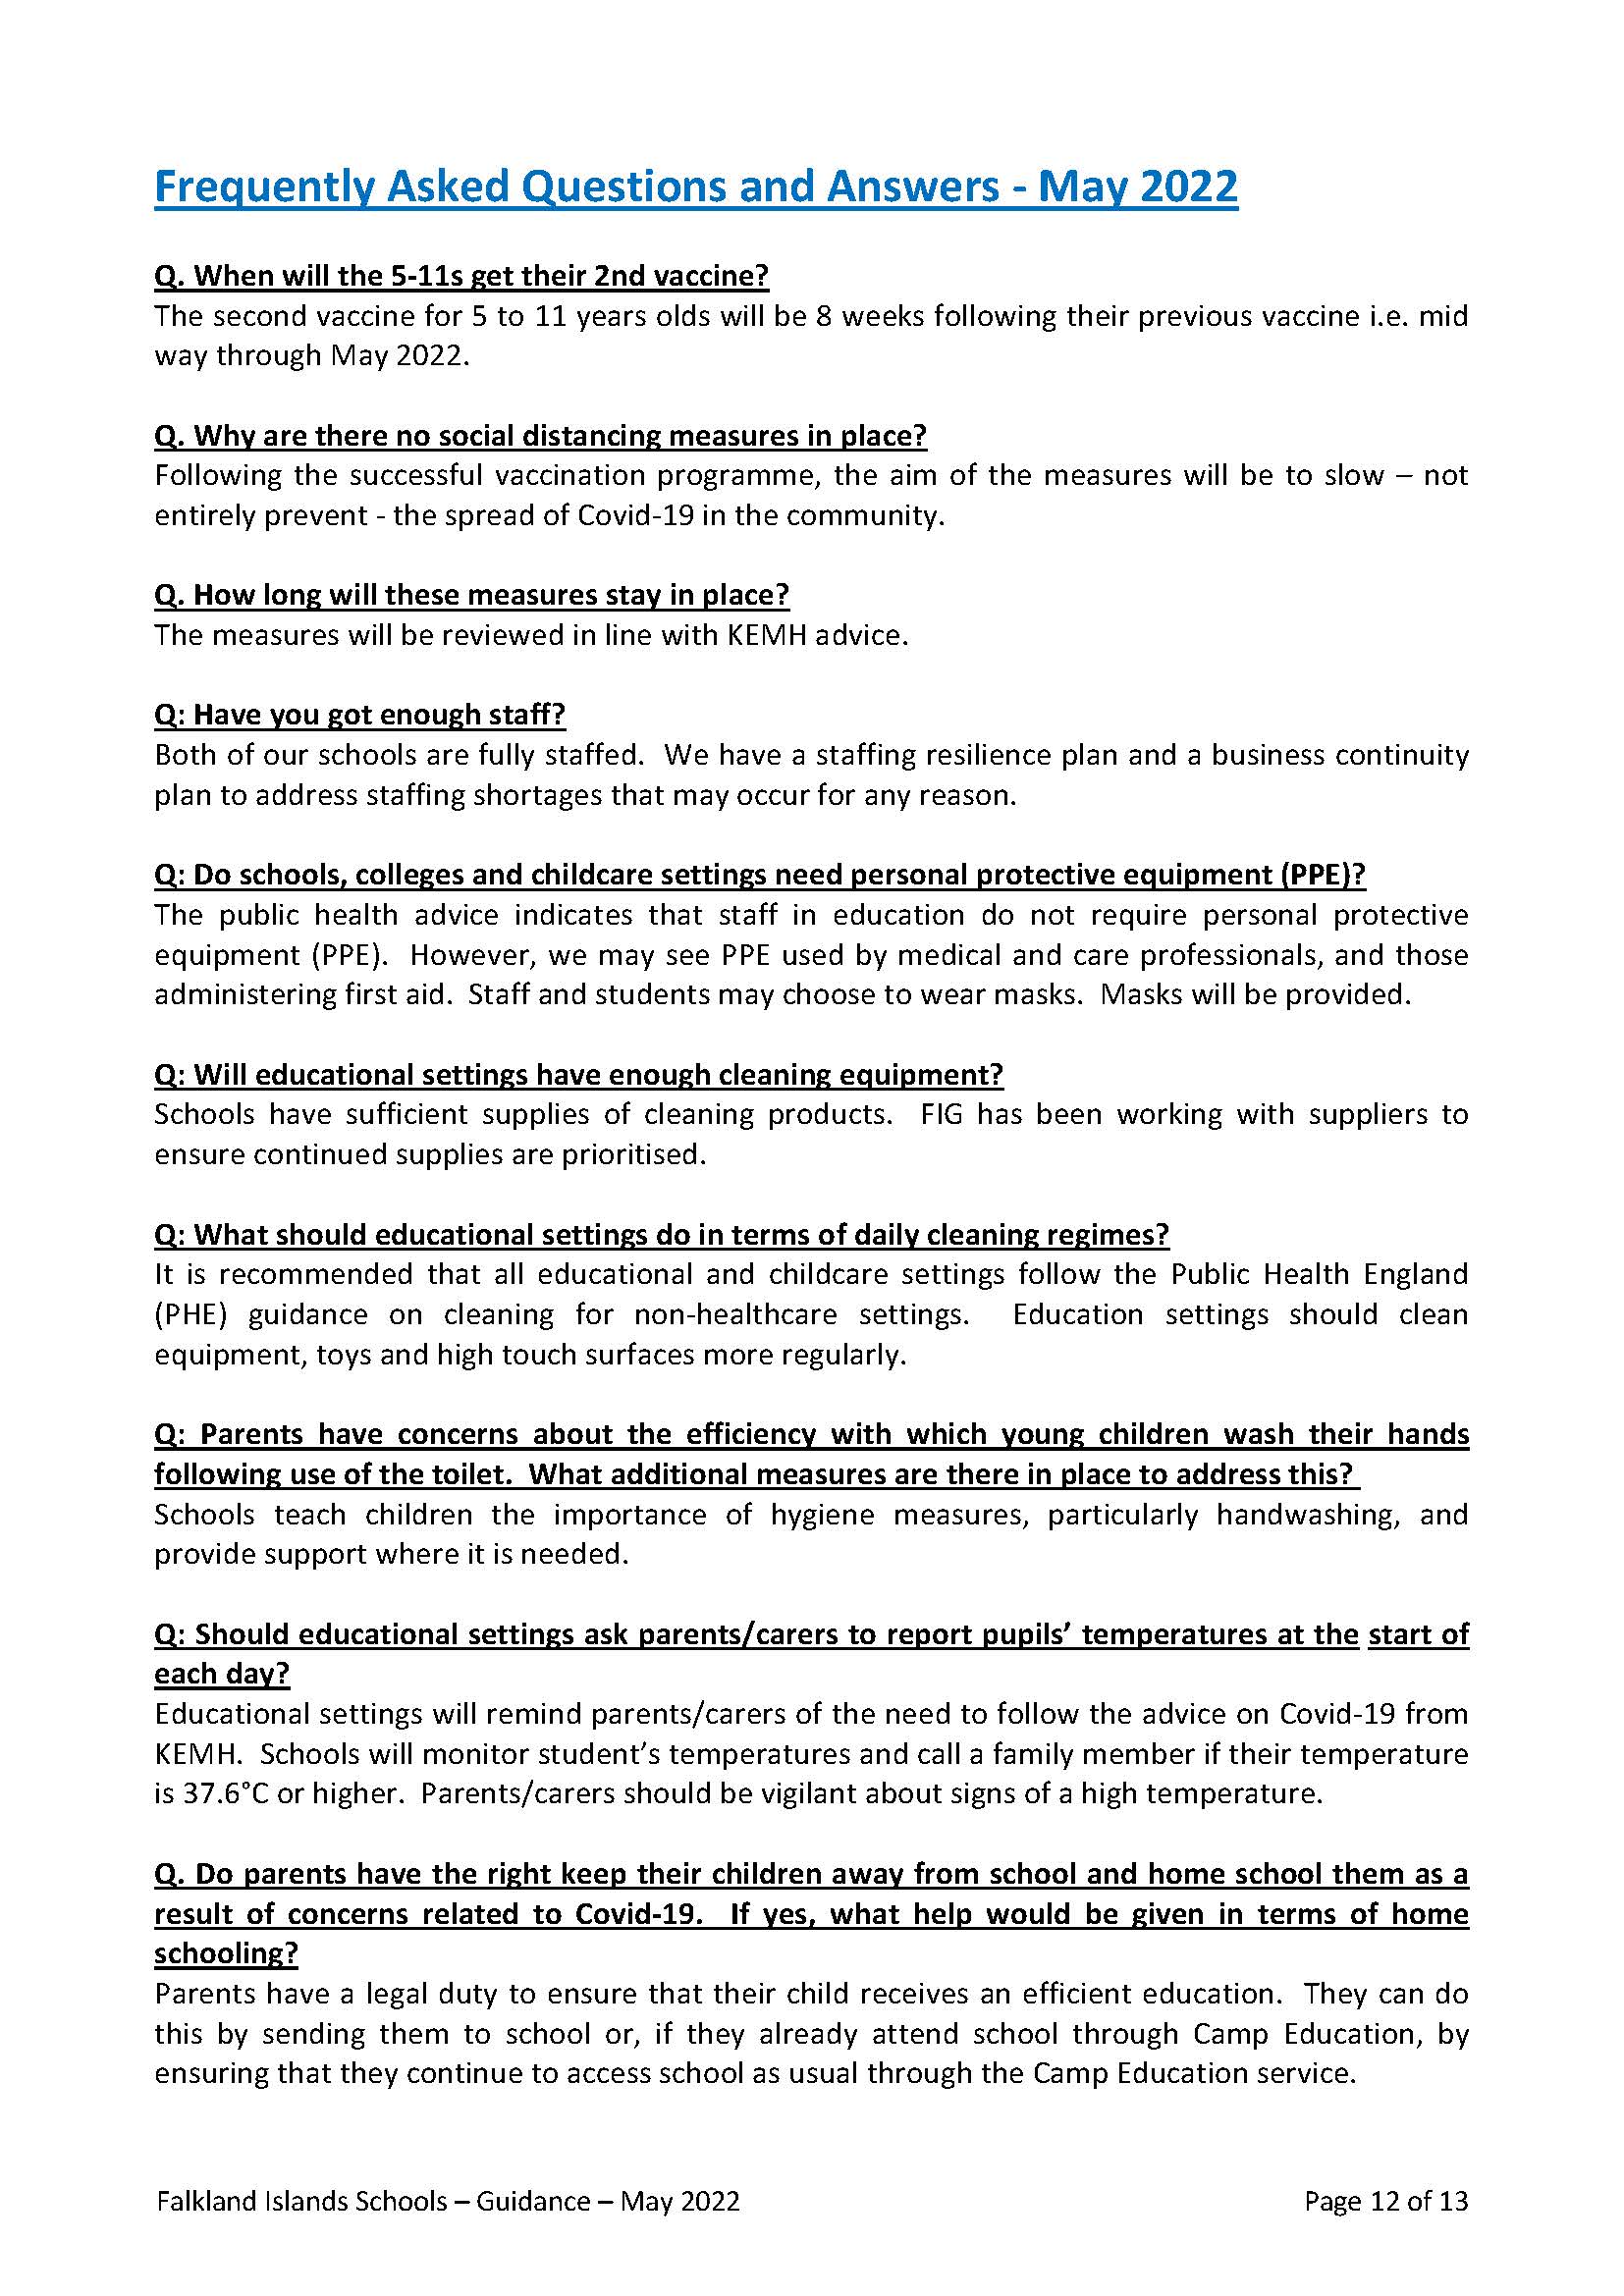 Falkland Islands Schools Covid 19 Guidance May 2022 Page 12